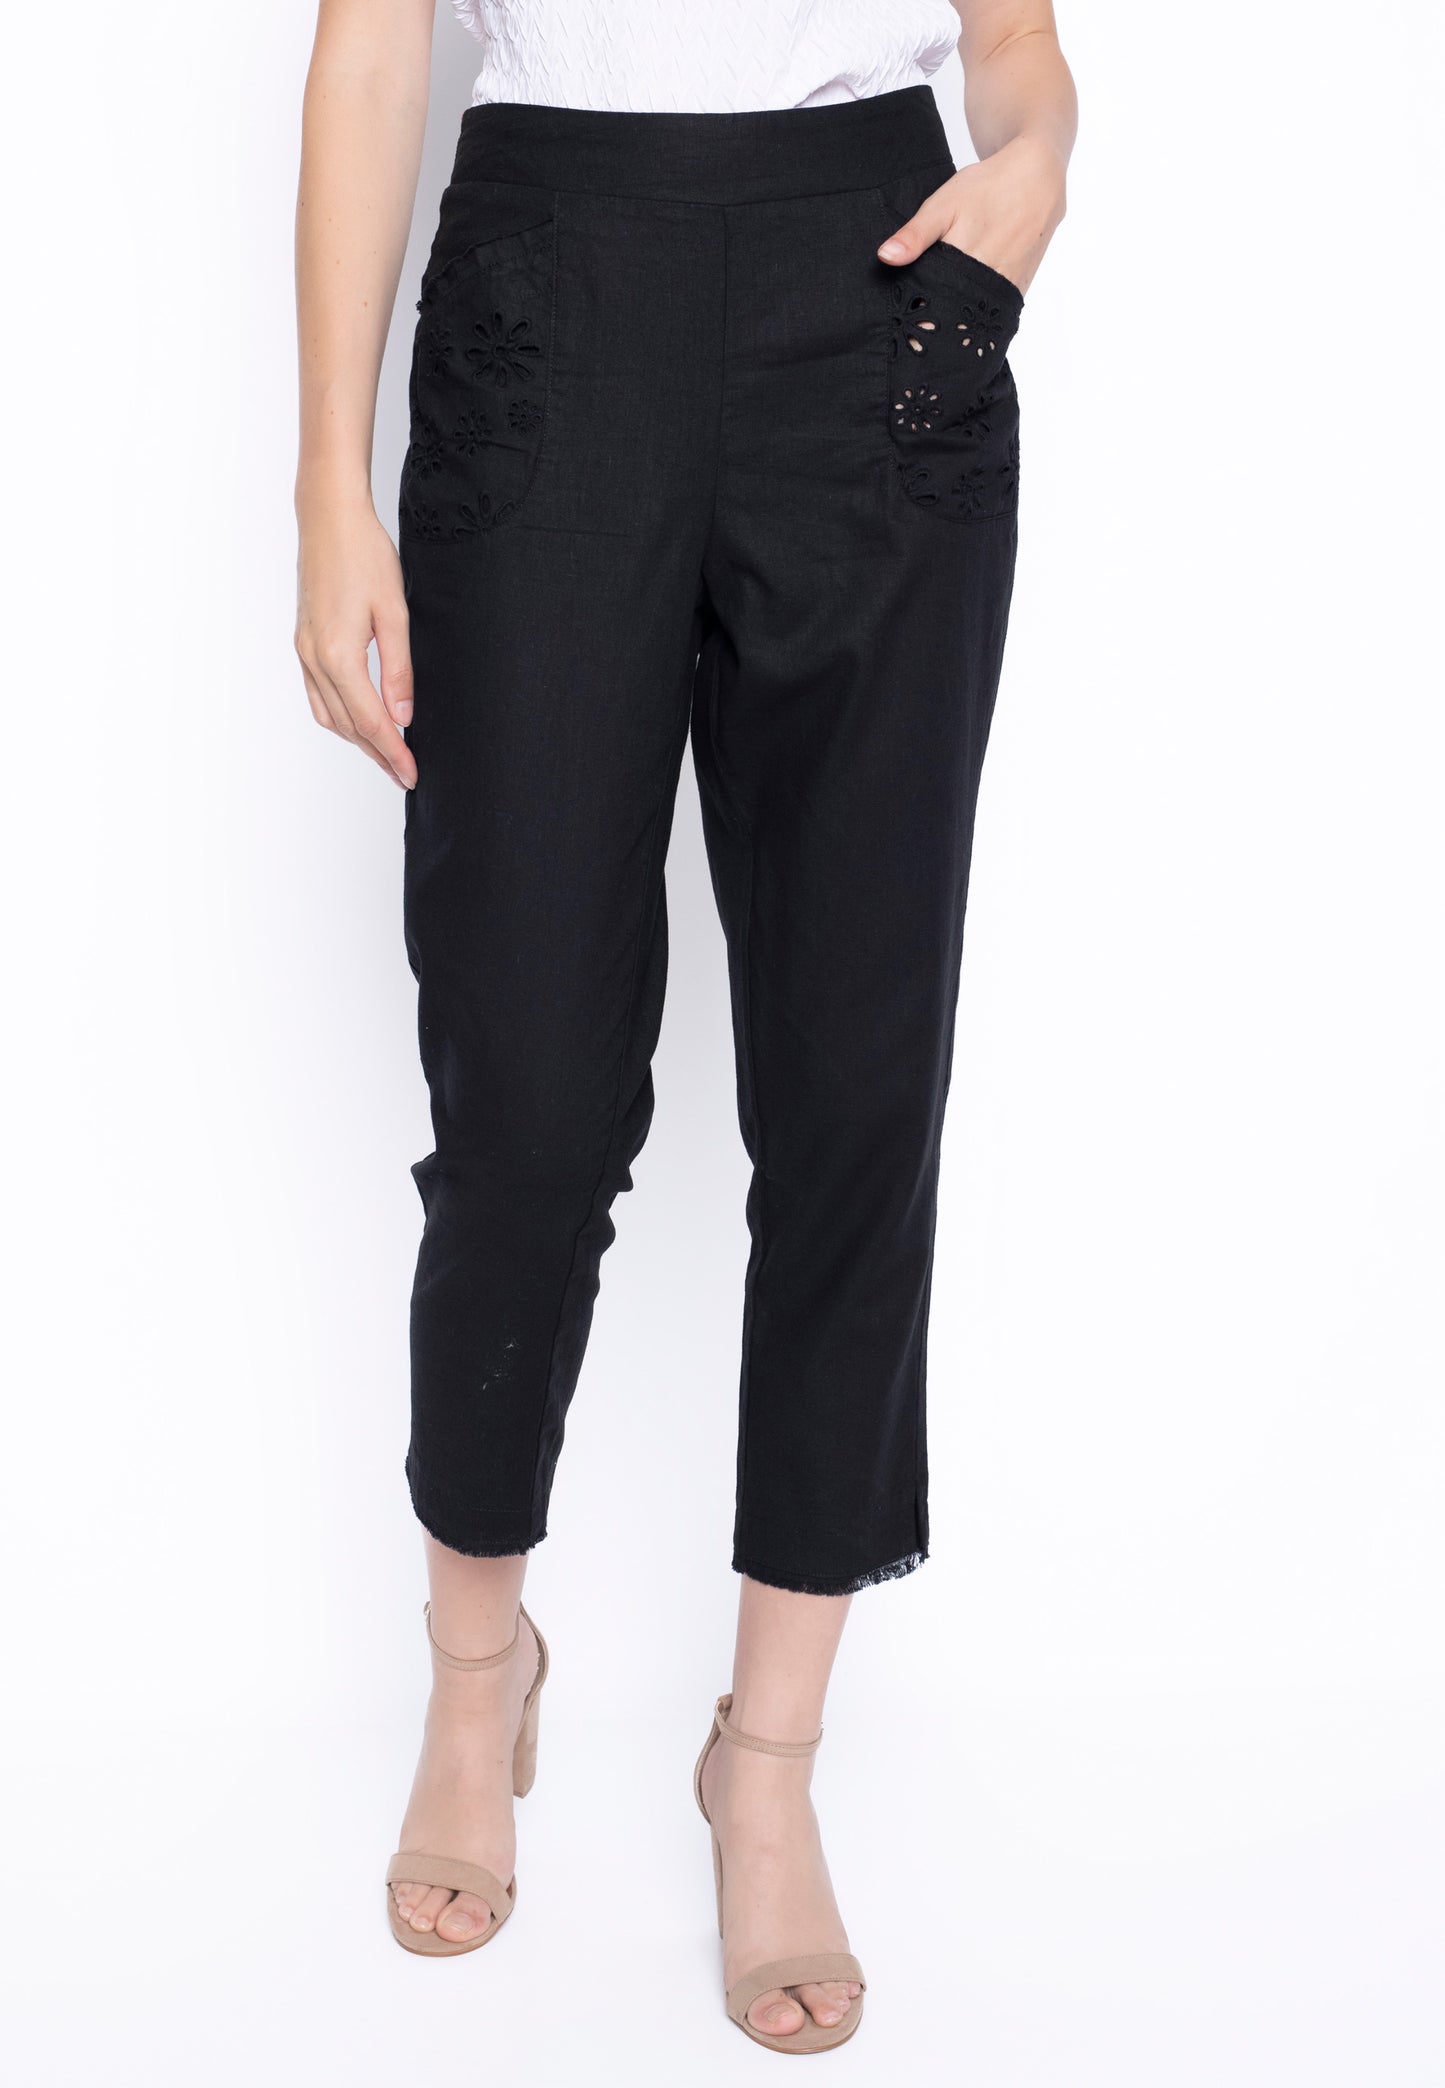 The Pull-On Straight Leg Pants in Black color.